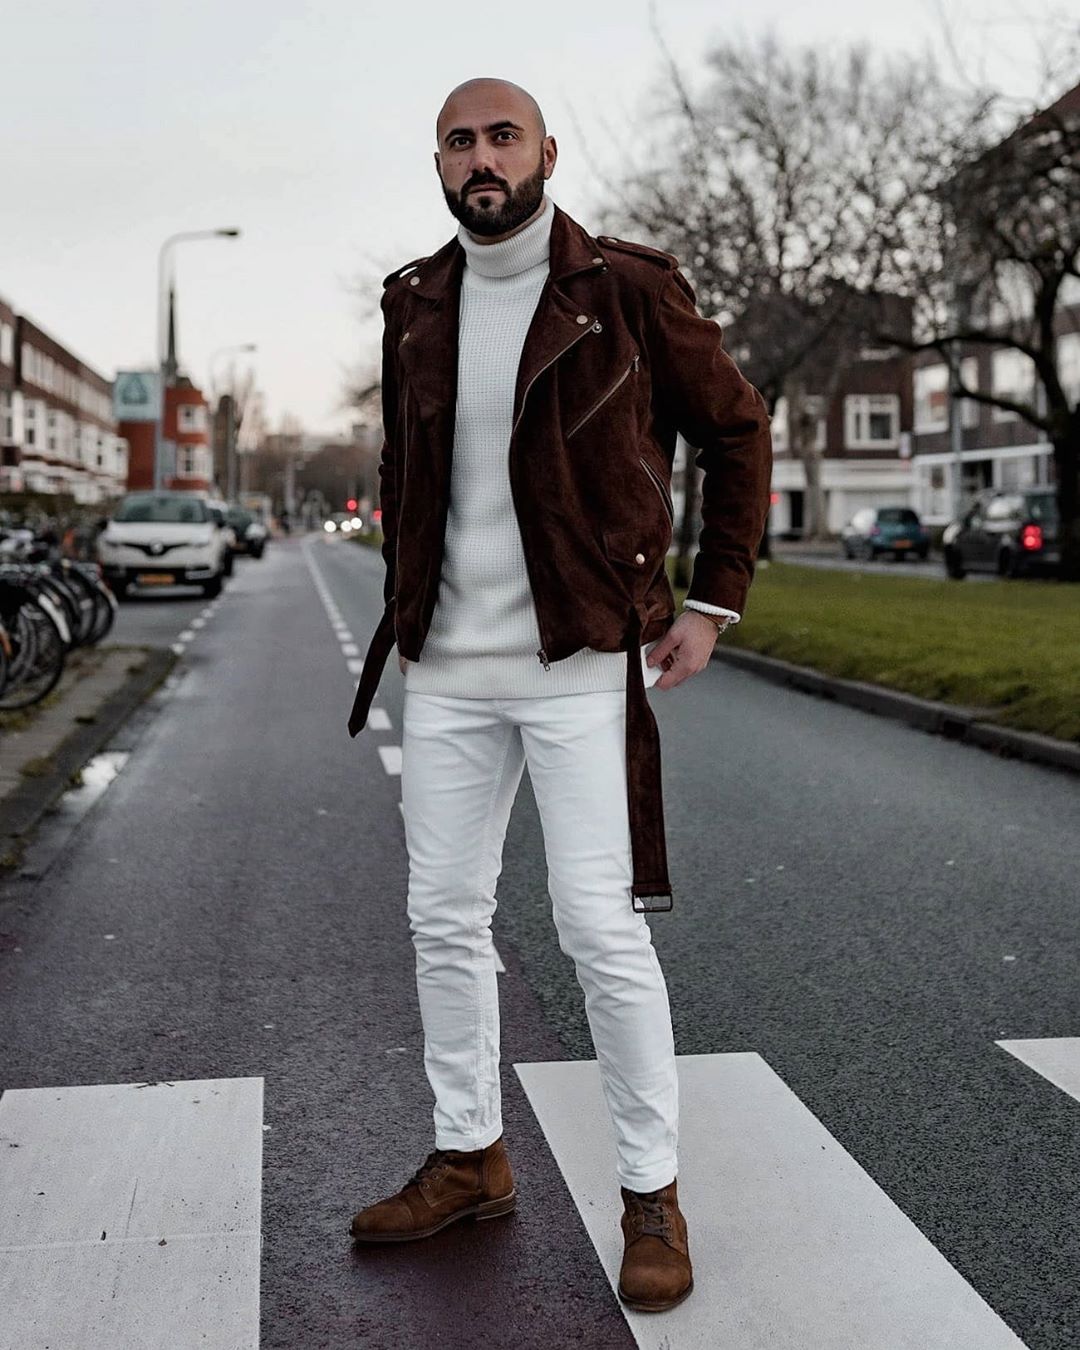 Stylish man wearing brown suede jacket over all-white outfit